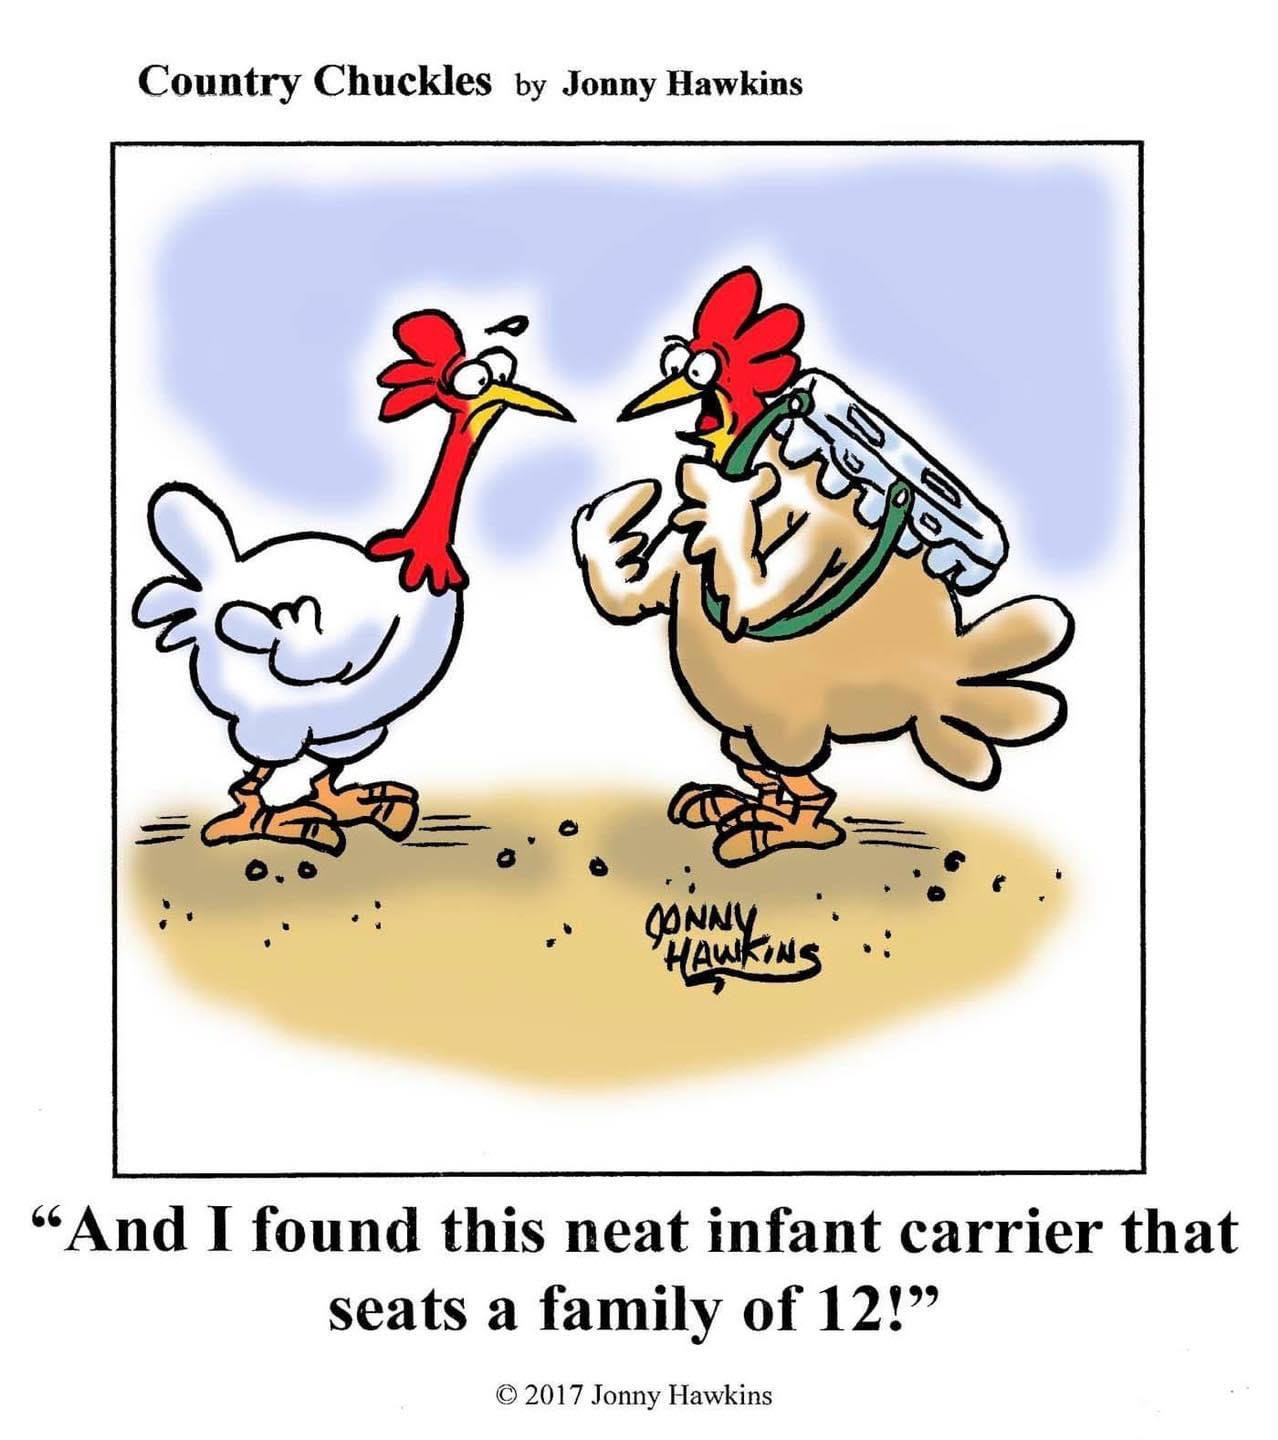 chicken infant carrier cartoon by Johnny Hawkins